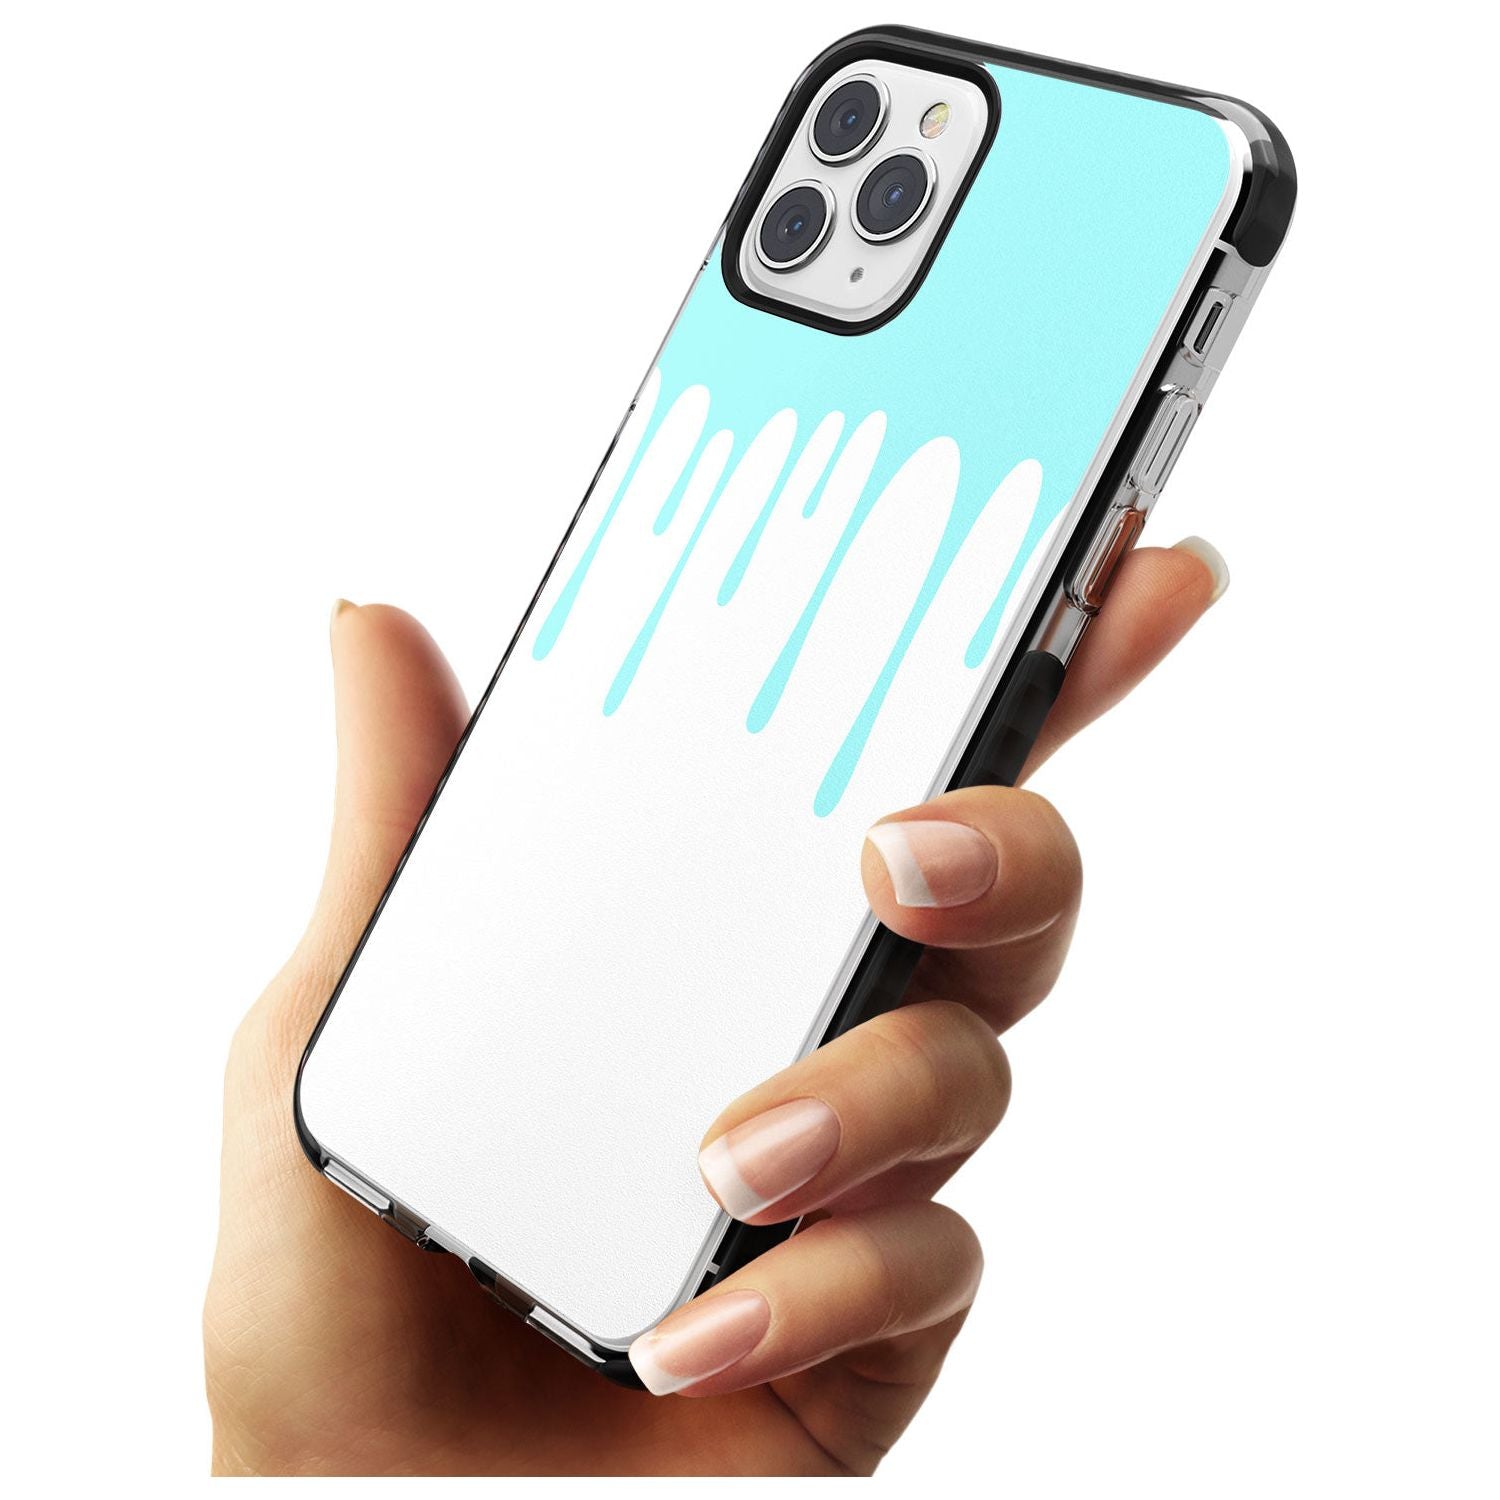 Melted Effect: Teal & White iPhone Case Black Impact Phone Case Warehouse 11 Pro Max